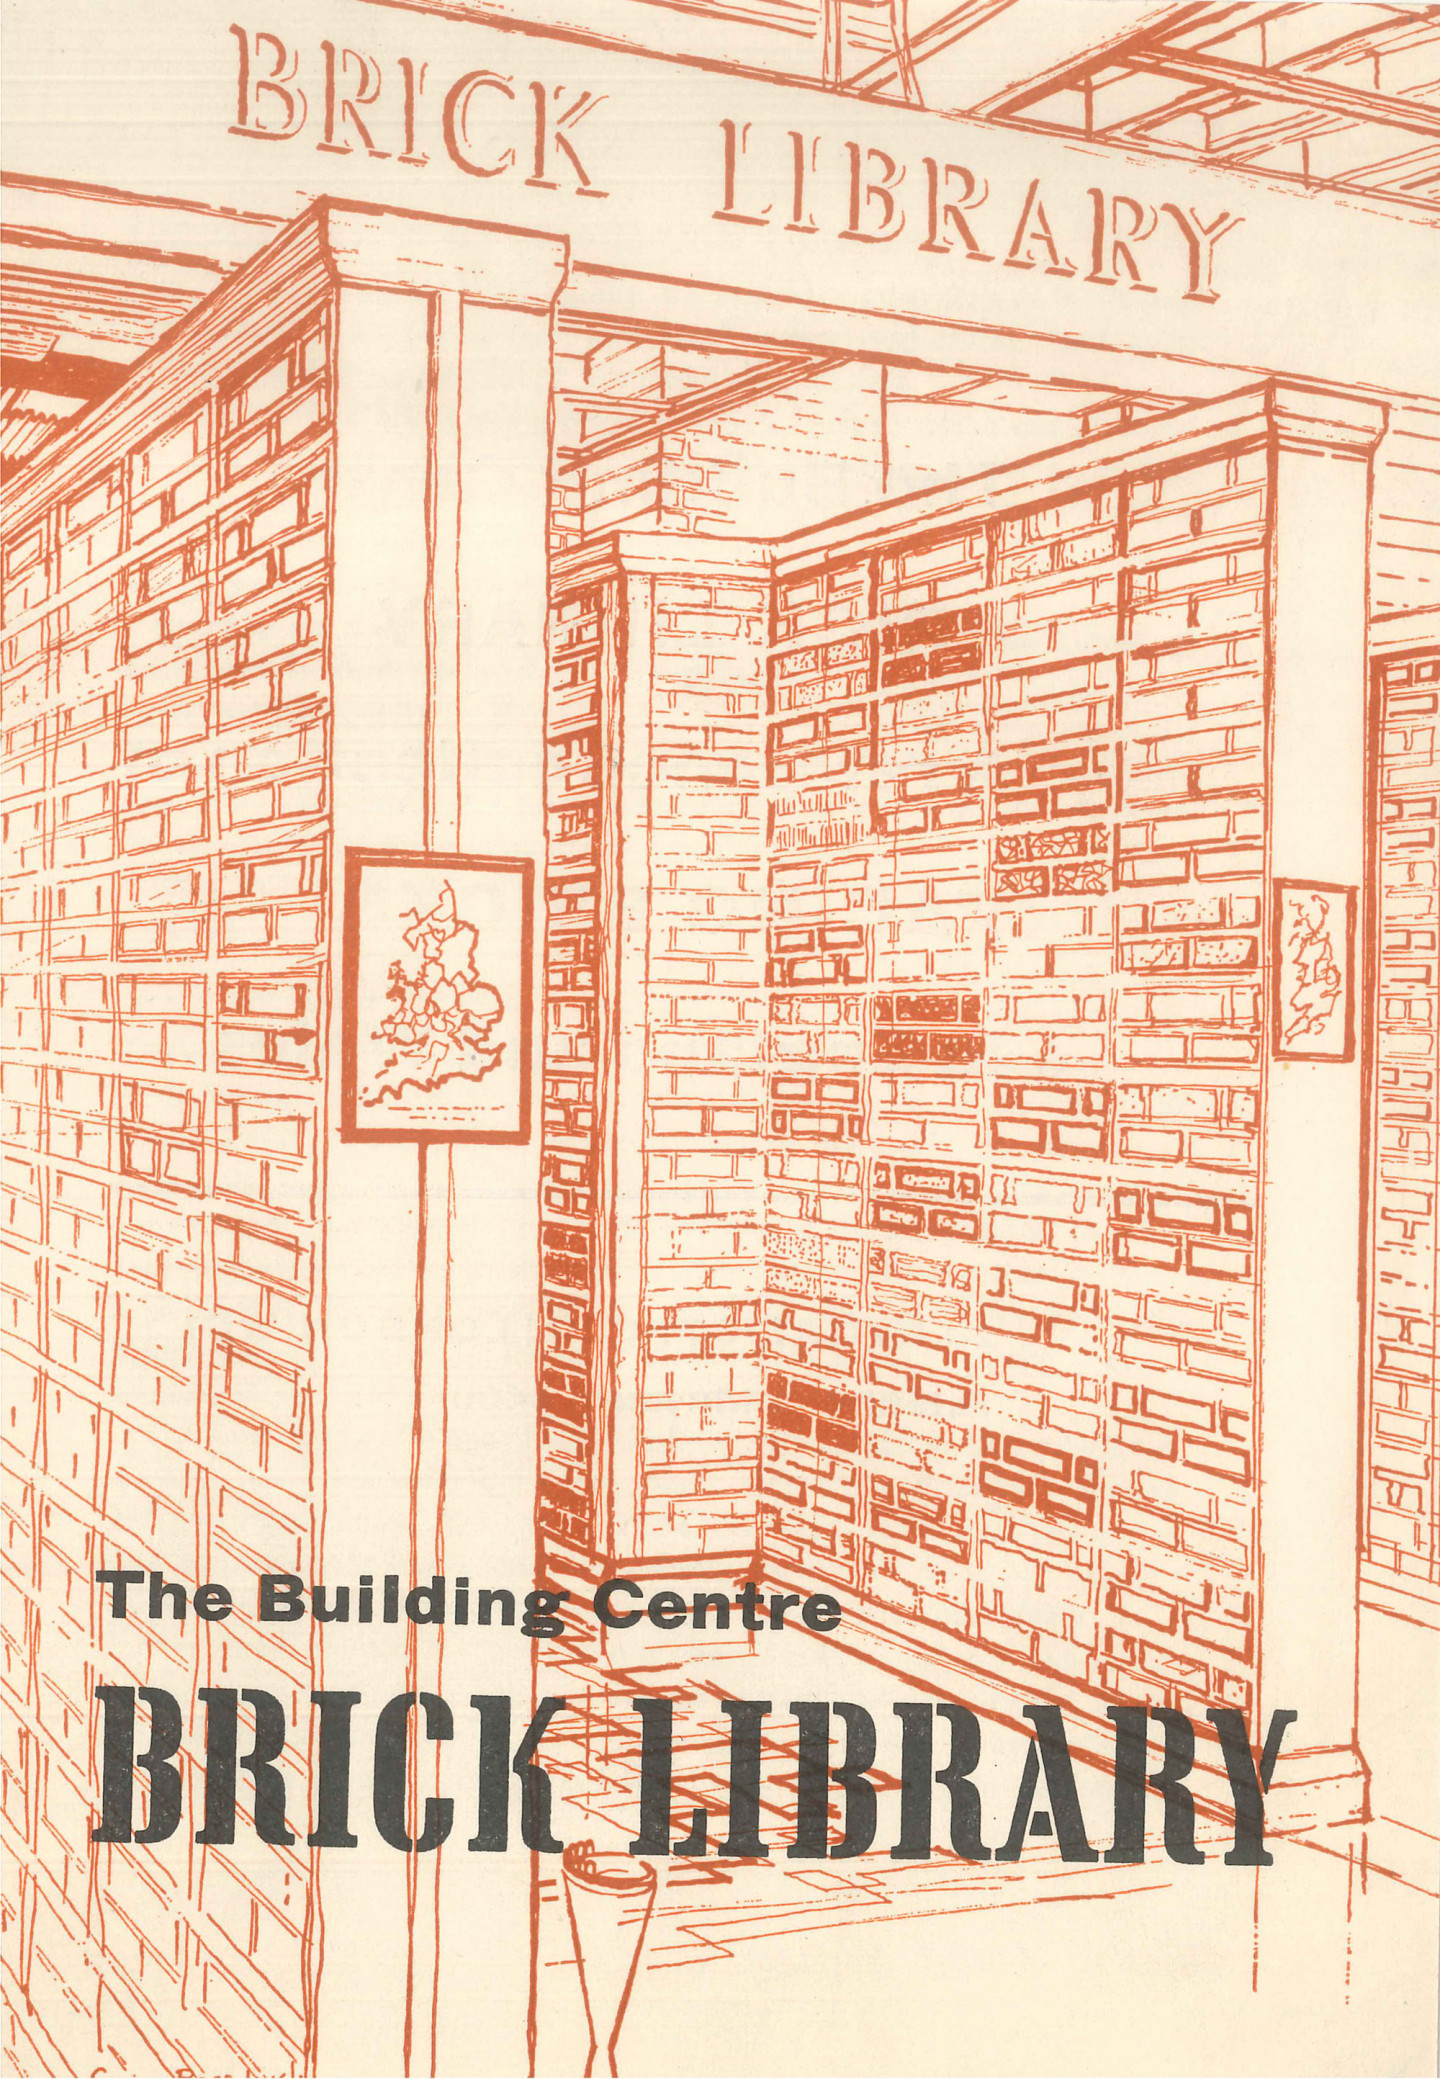 1961 – Brick library catalogue, 26 Store Street  © Building Centre